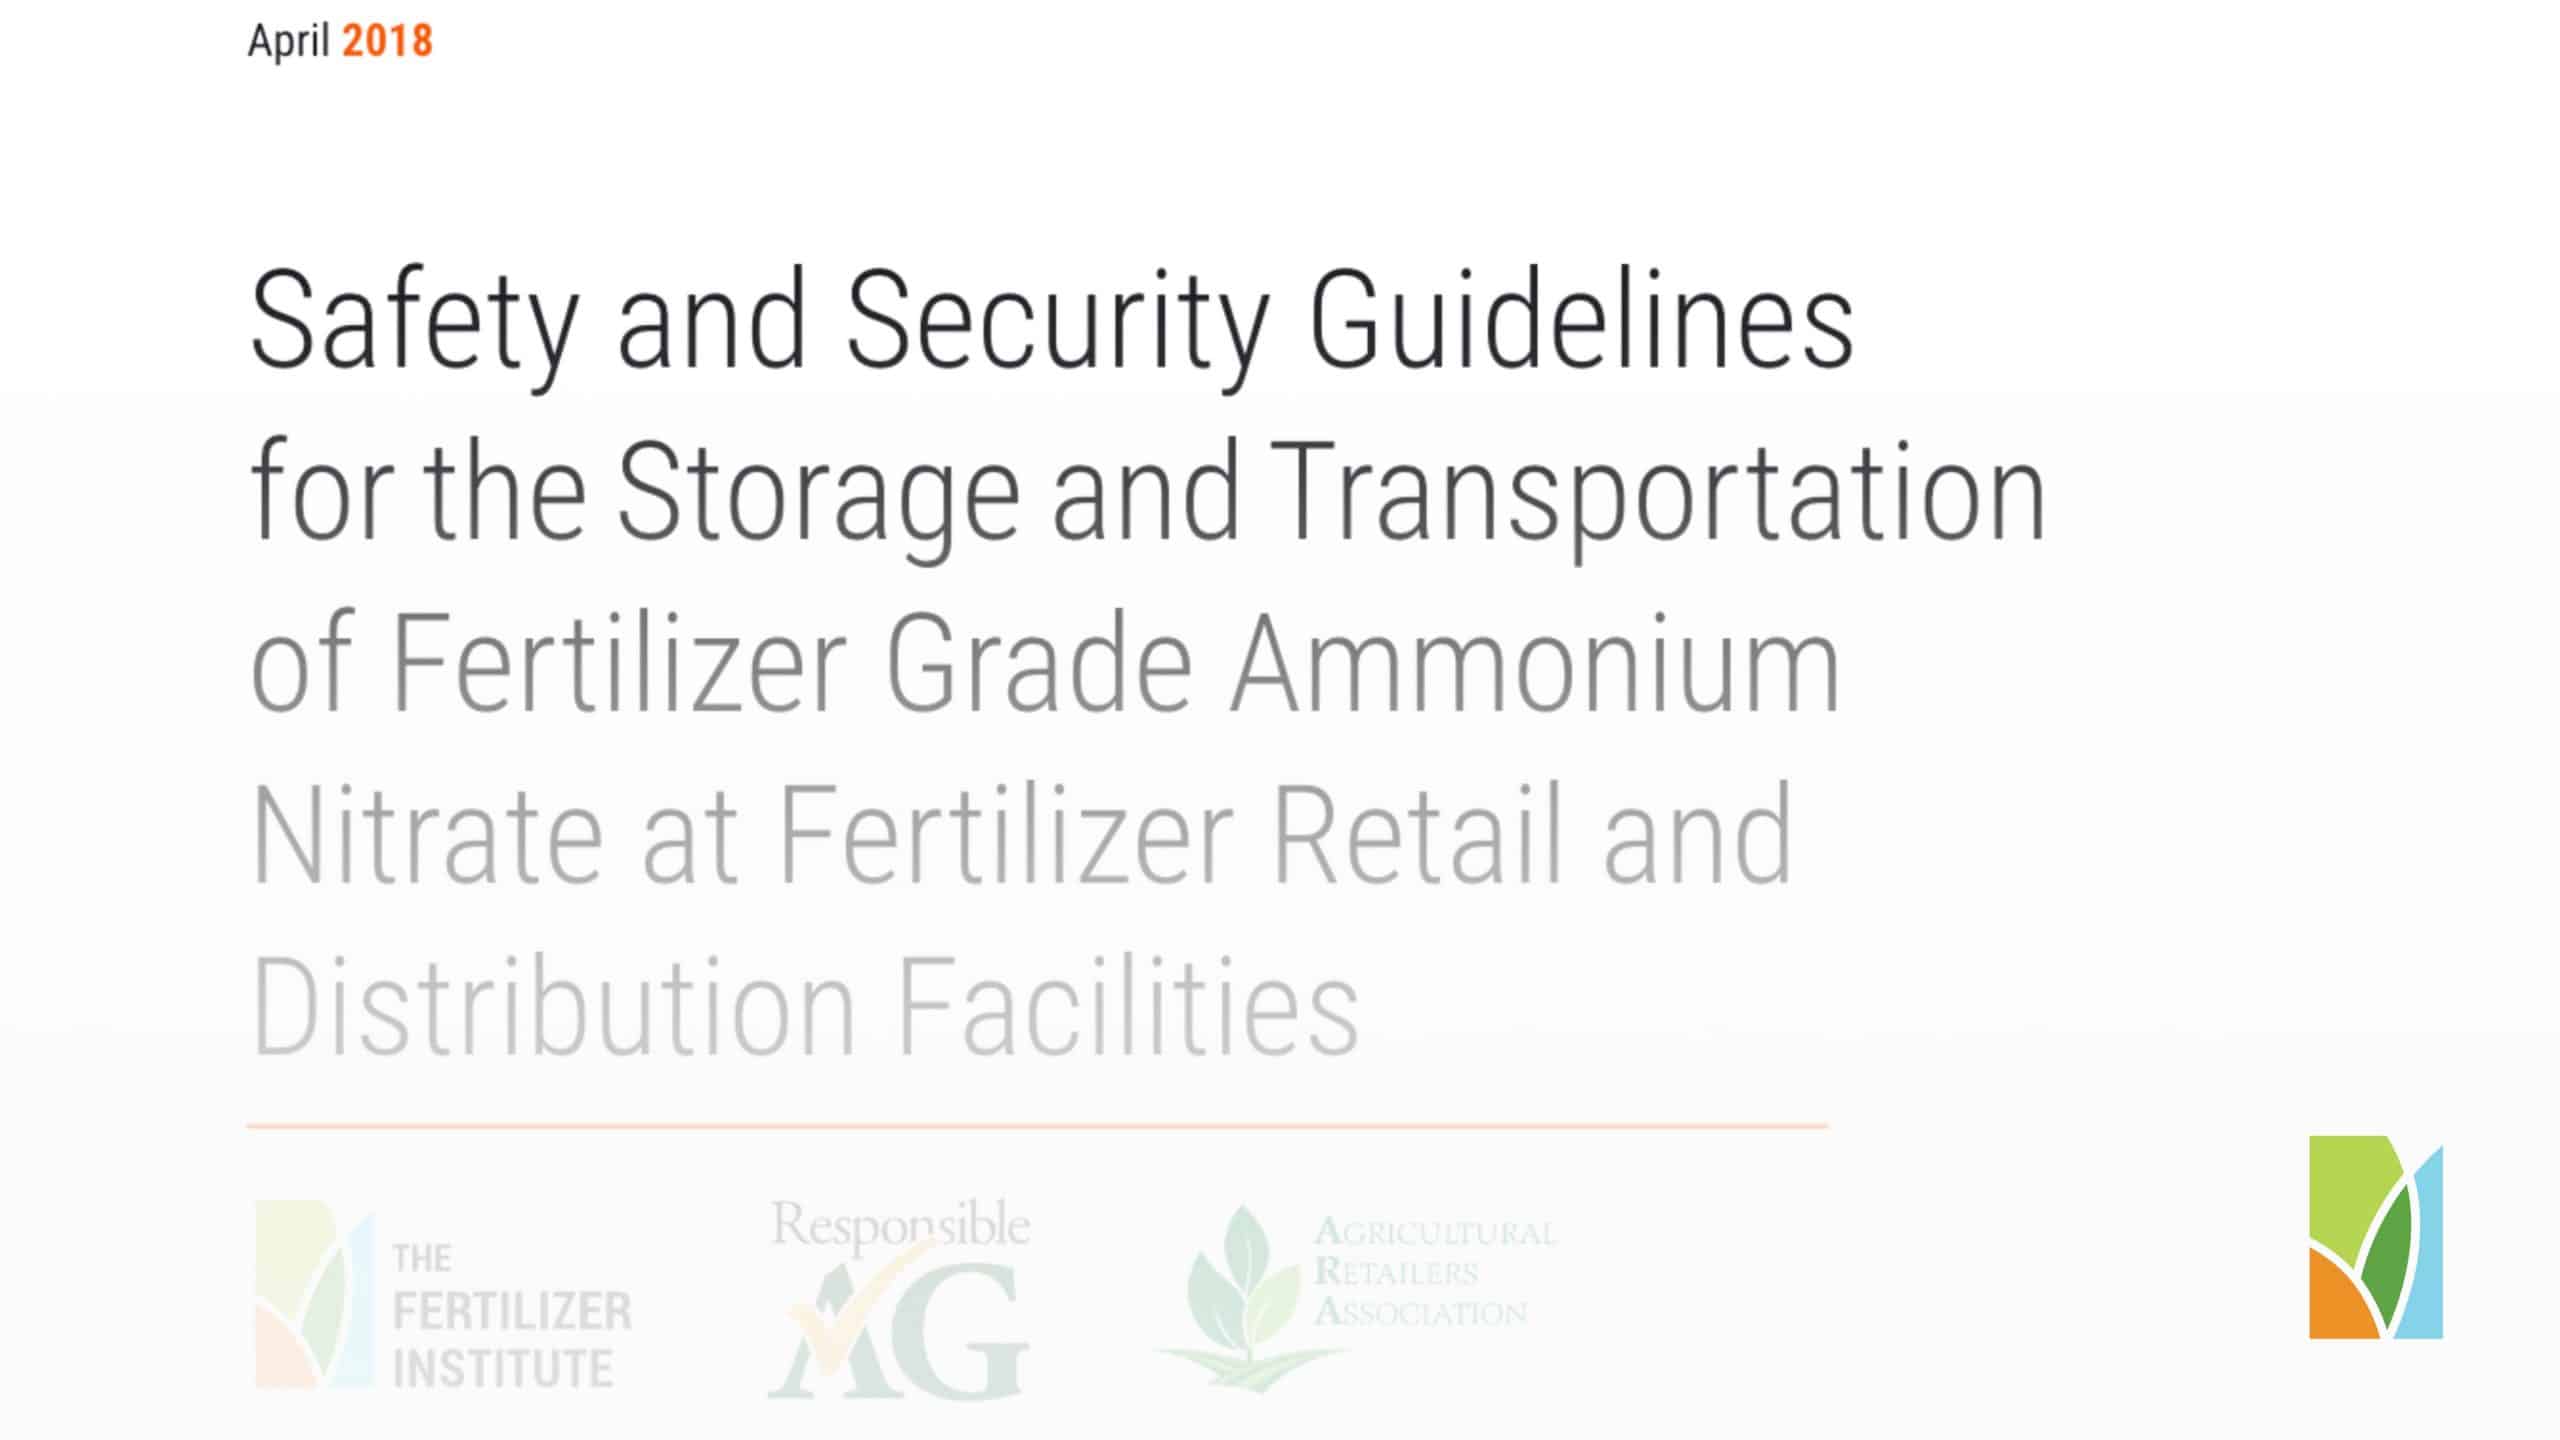 Guidelines for the Storage and Transportation of Fertilizer Grade Ammonium Nitrate at fertilizer retail and distribution facilities